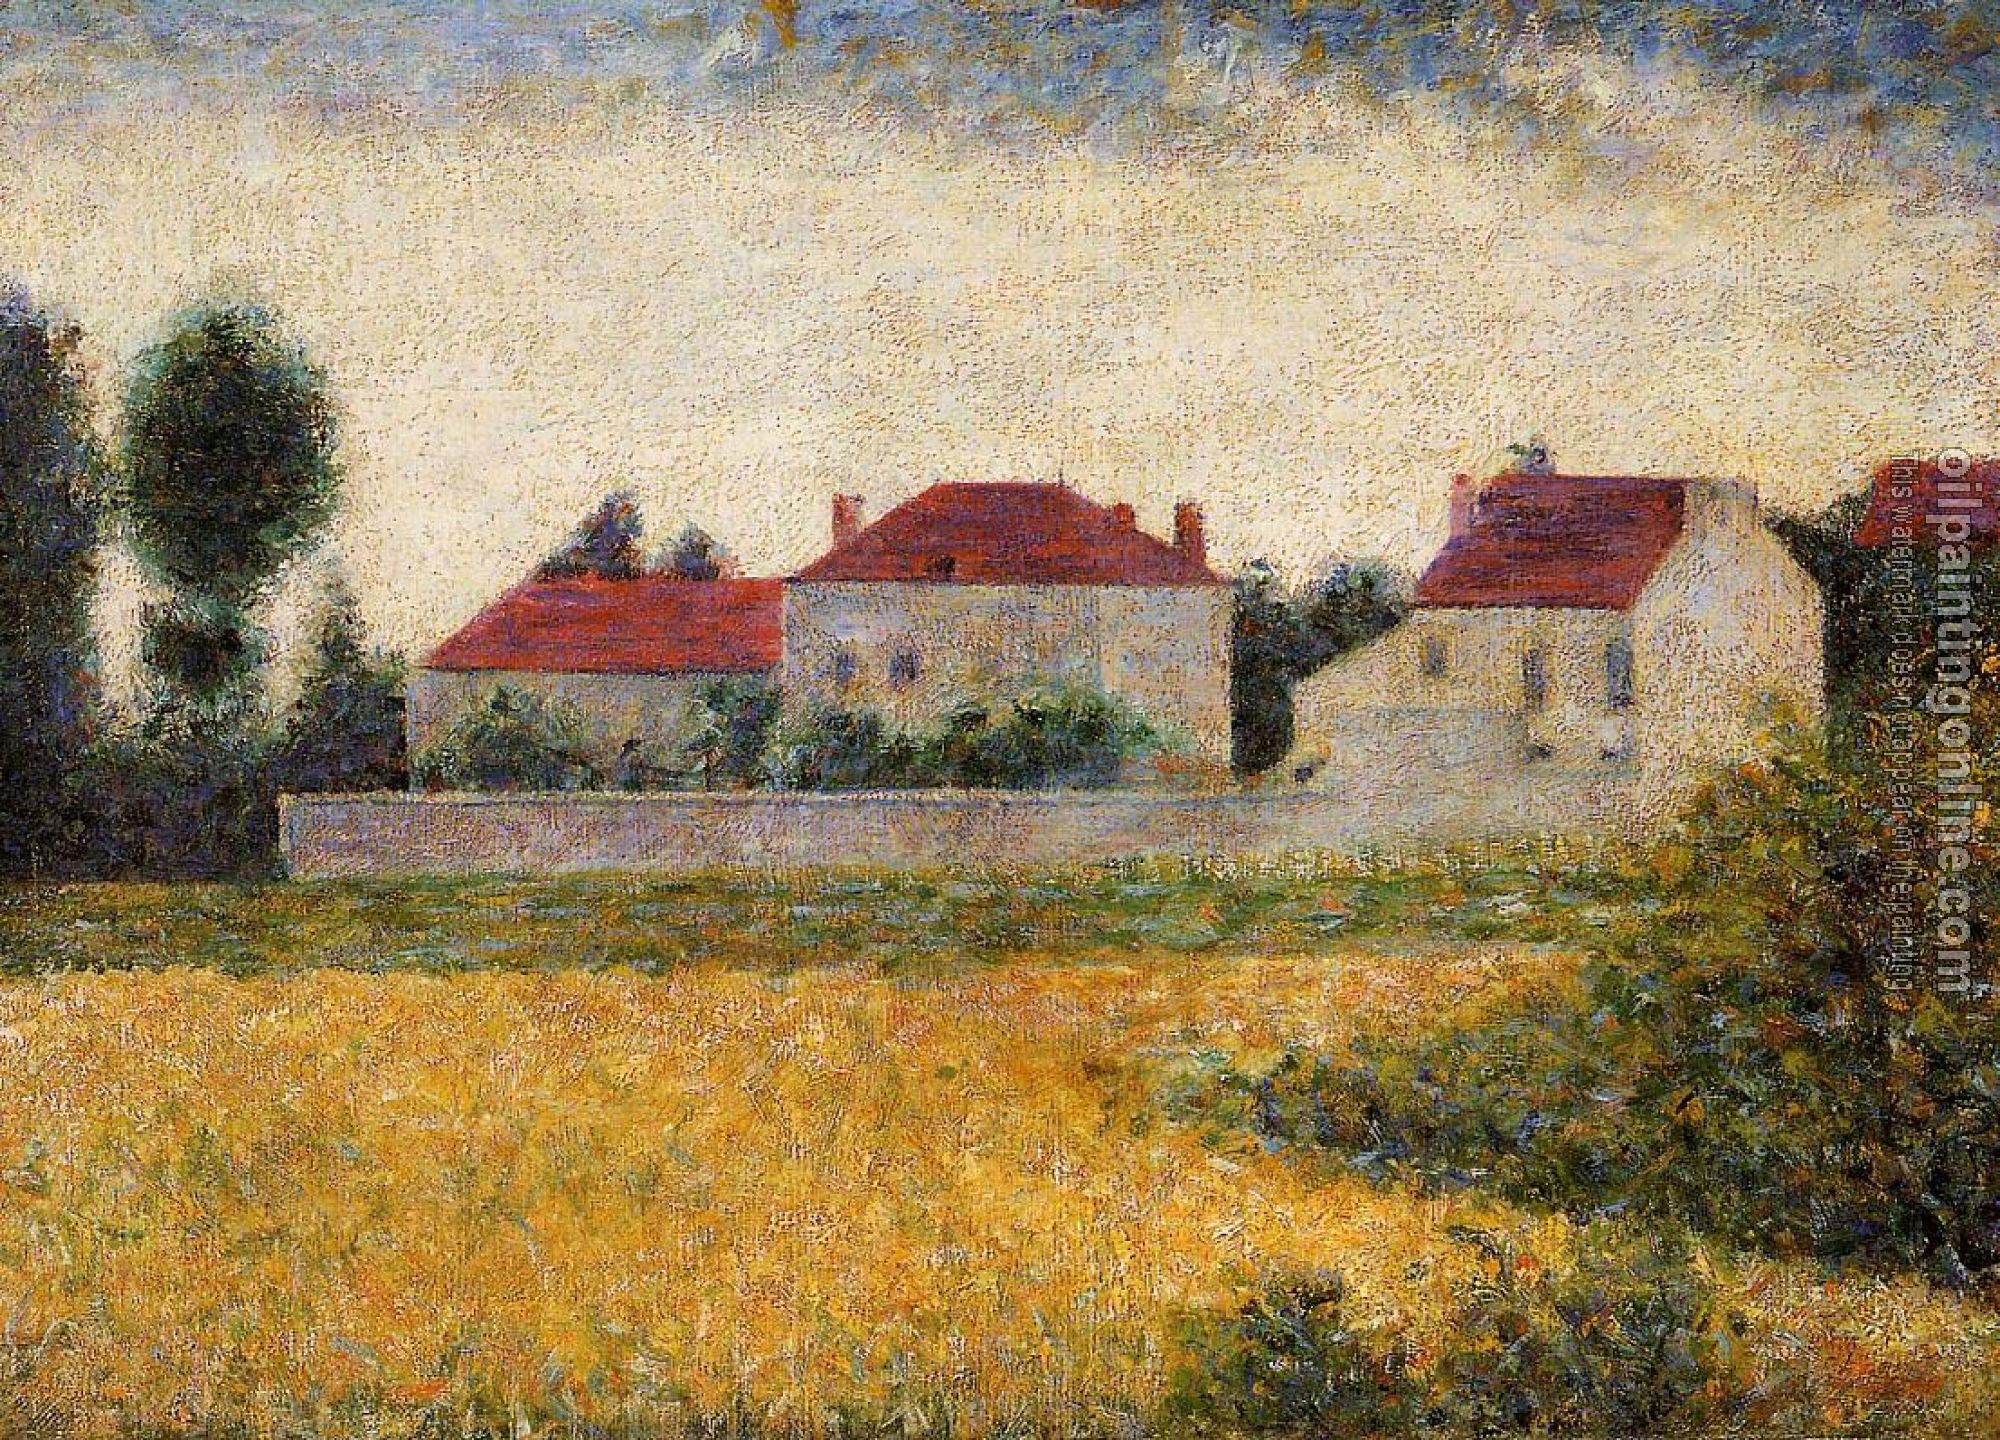 Seurat, Georges - White Houses, Ville d'Avray